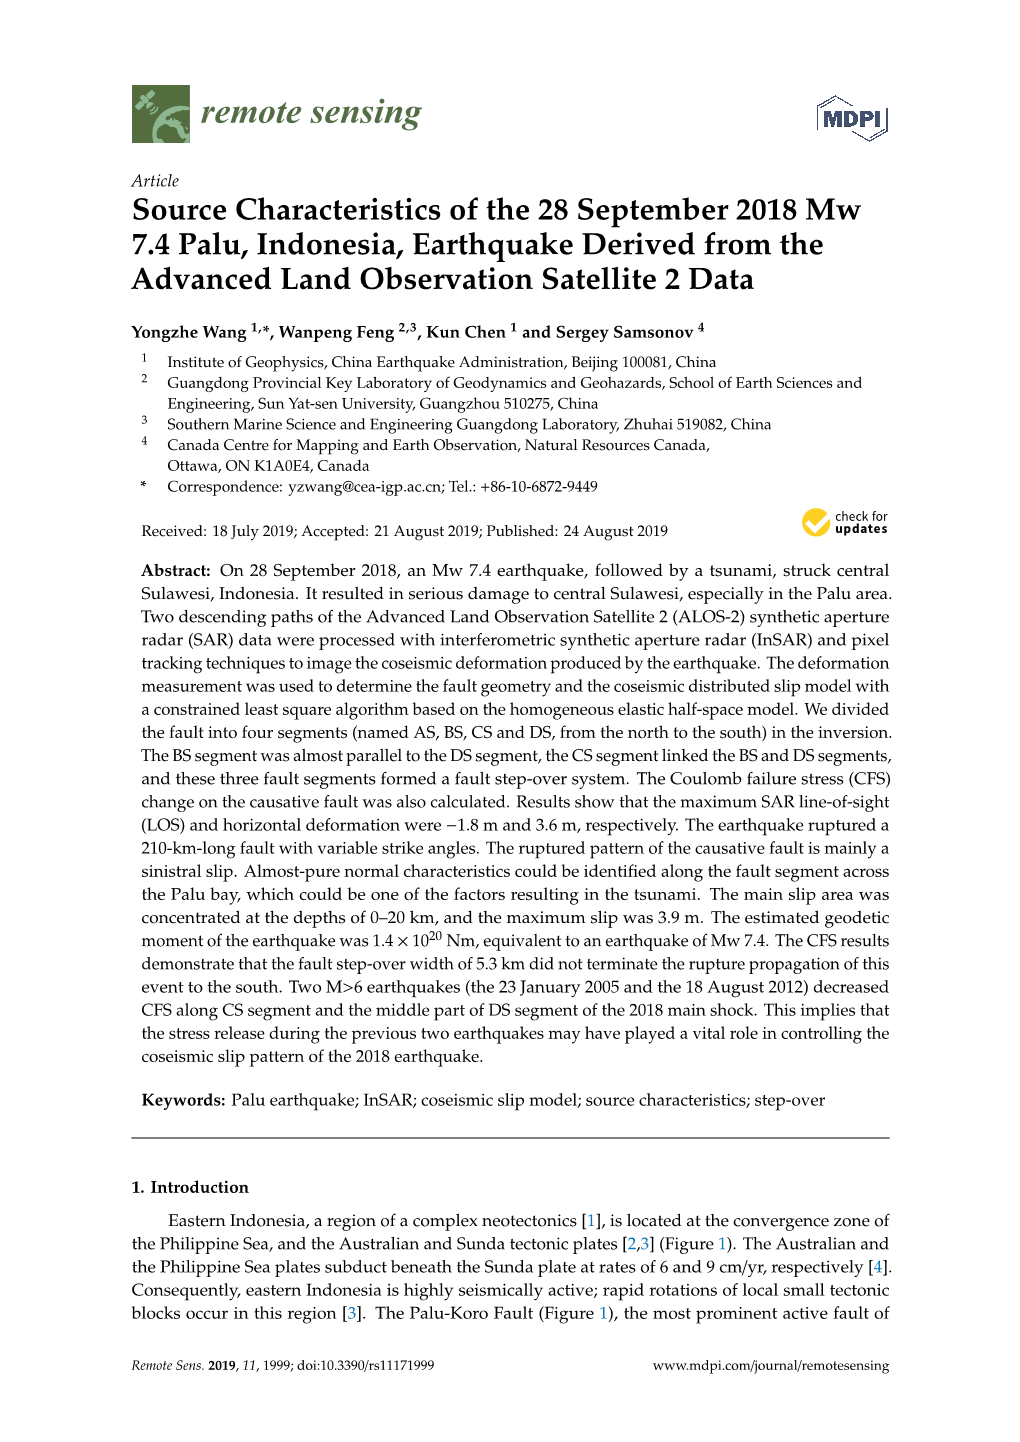 Source Characteristics of the 28 September 2018 Mw 7.4 Palu, Indonesia, Earthquake Derived from the Advanced Land Observation Satellite 2 Data